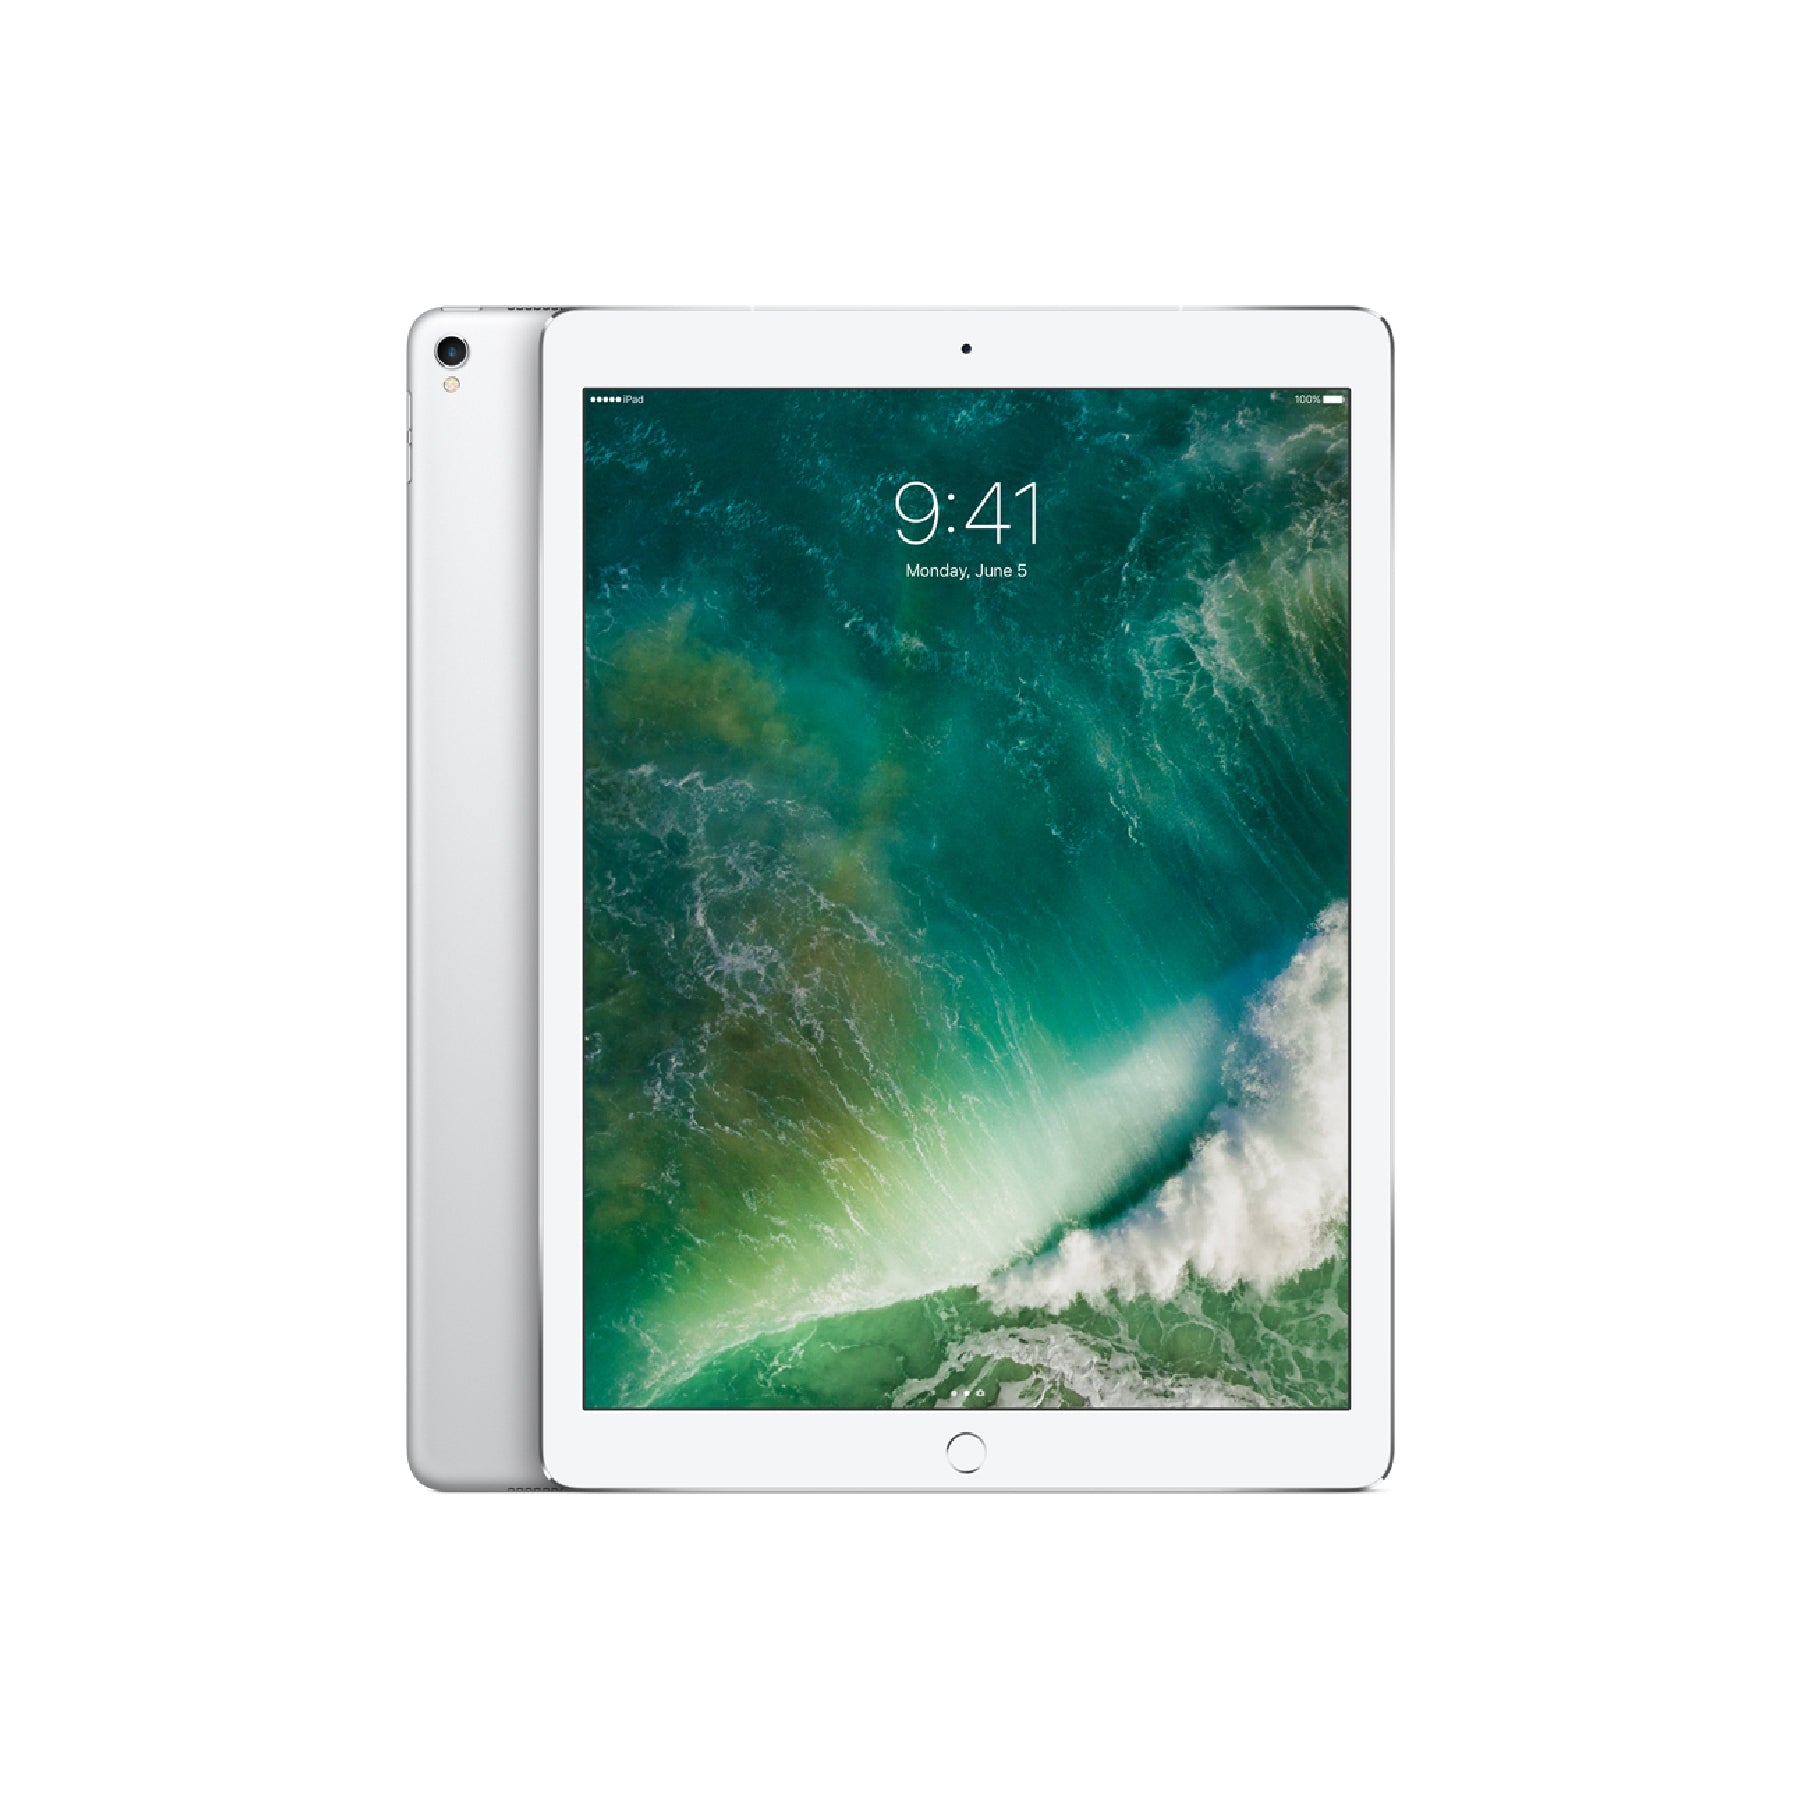 iPad Pro (9.7-inch, 2016) Wi-Fi + Cellular - iStore Pre-owned